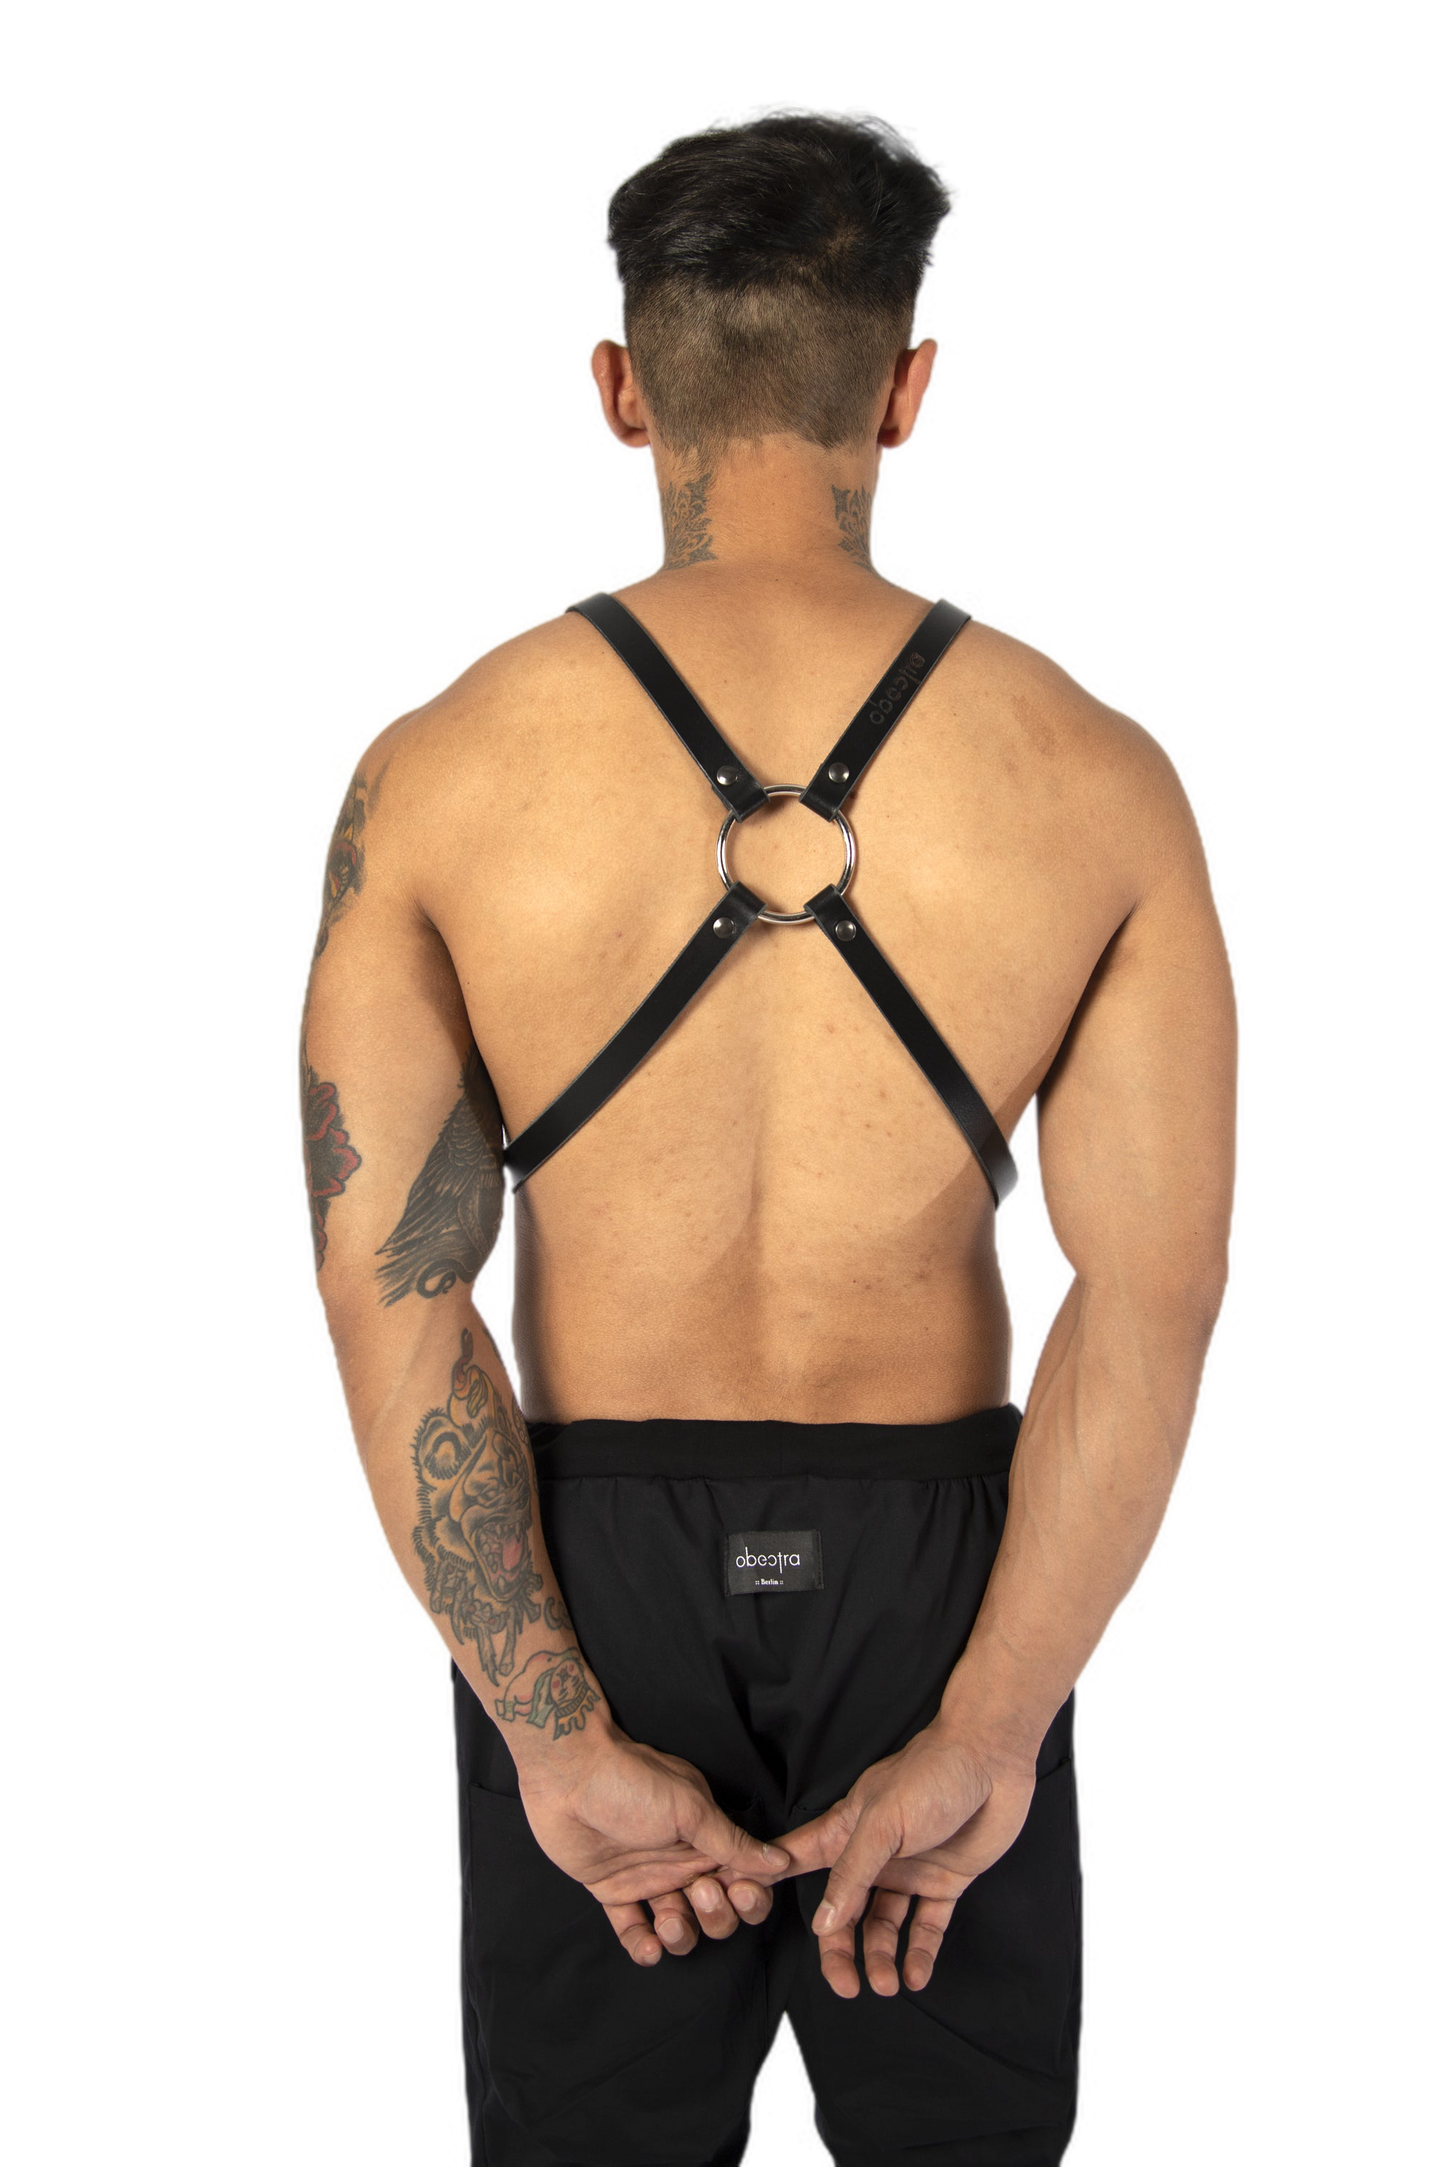 Double ring harness